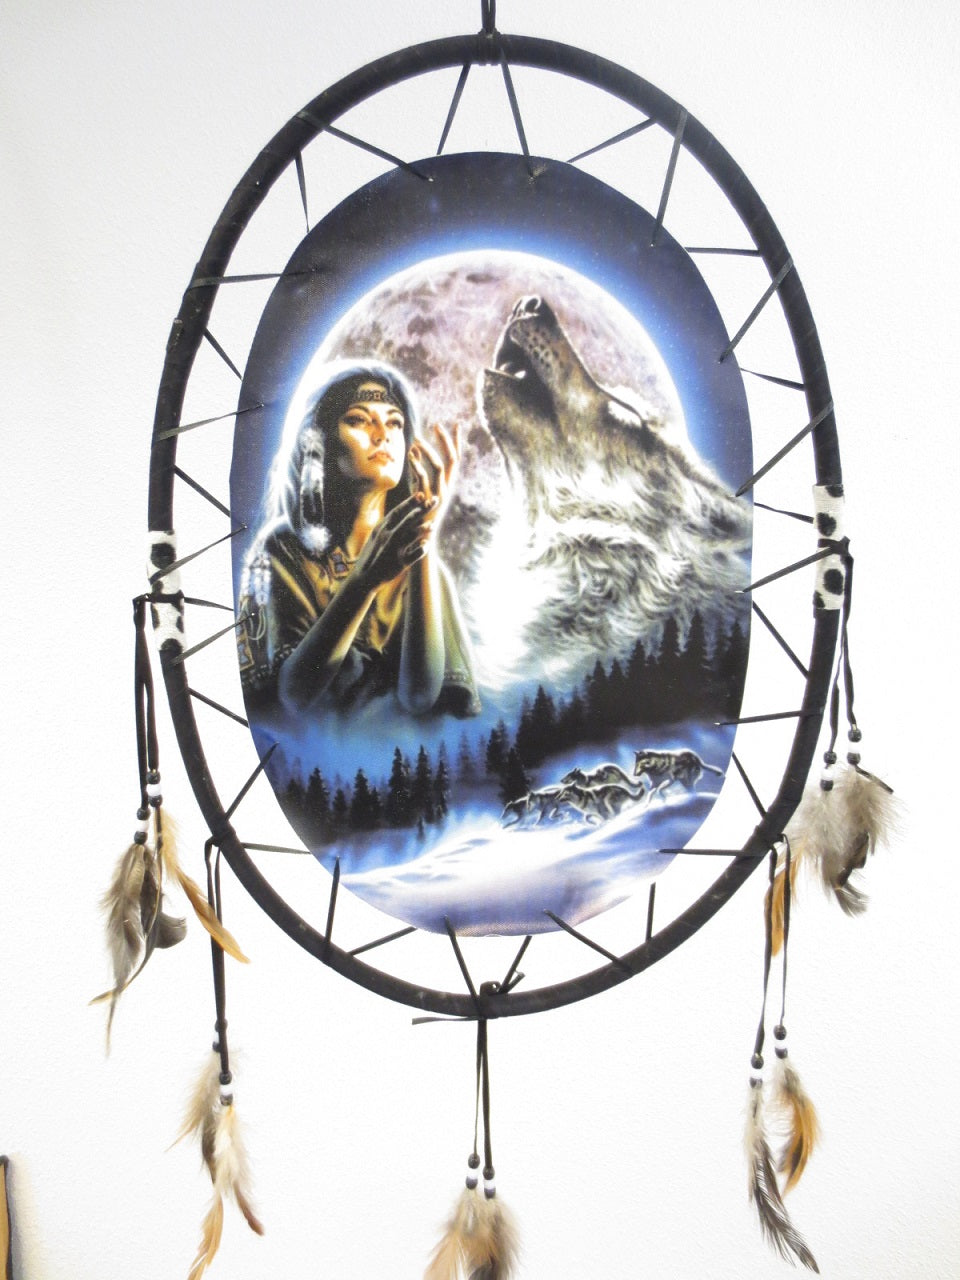 Dream catcher with Indian woman and wolf